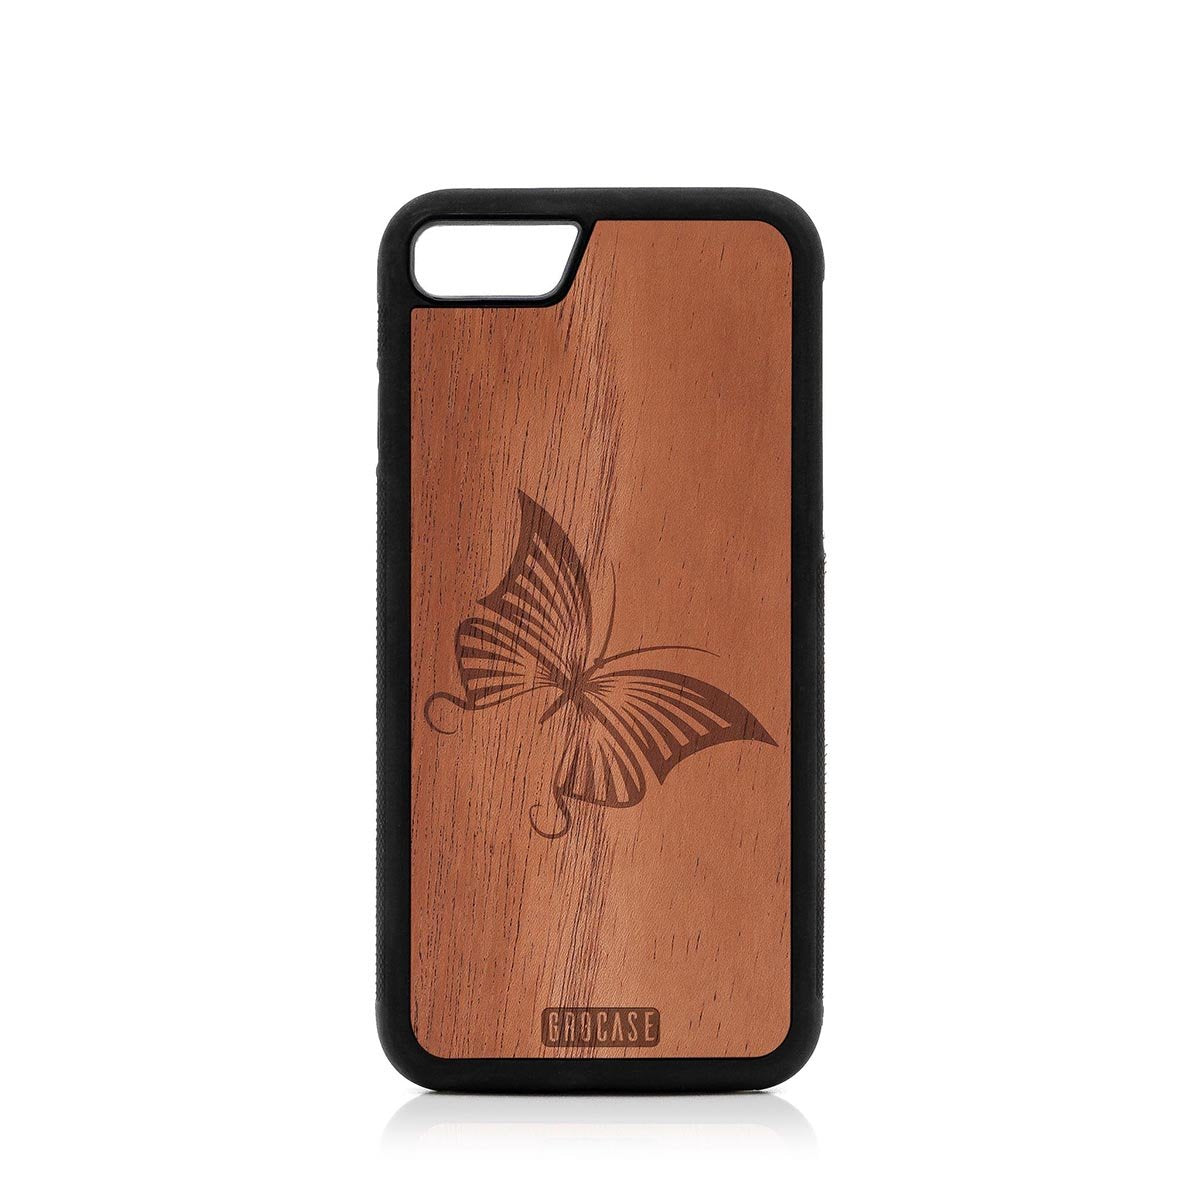 Butterfly Design Wood Case For iPhone SE 2020 by GR8CASE